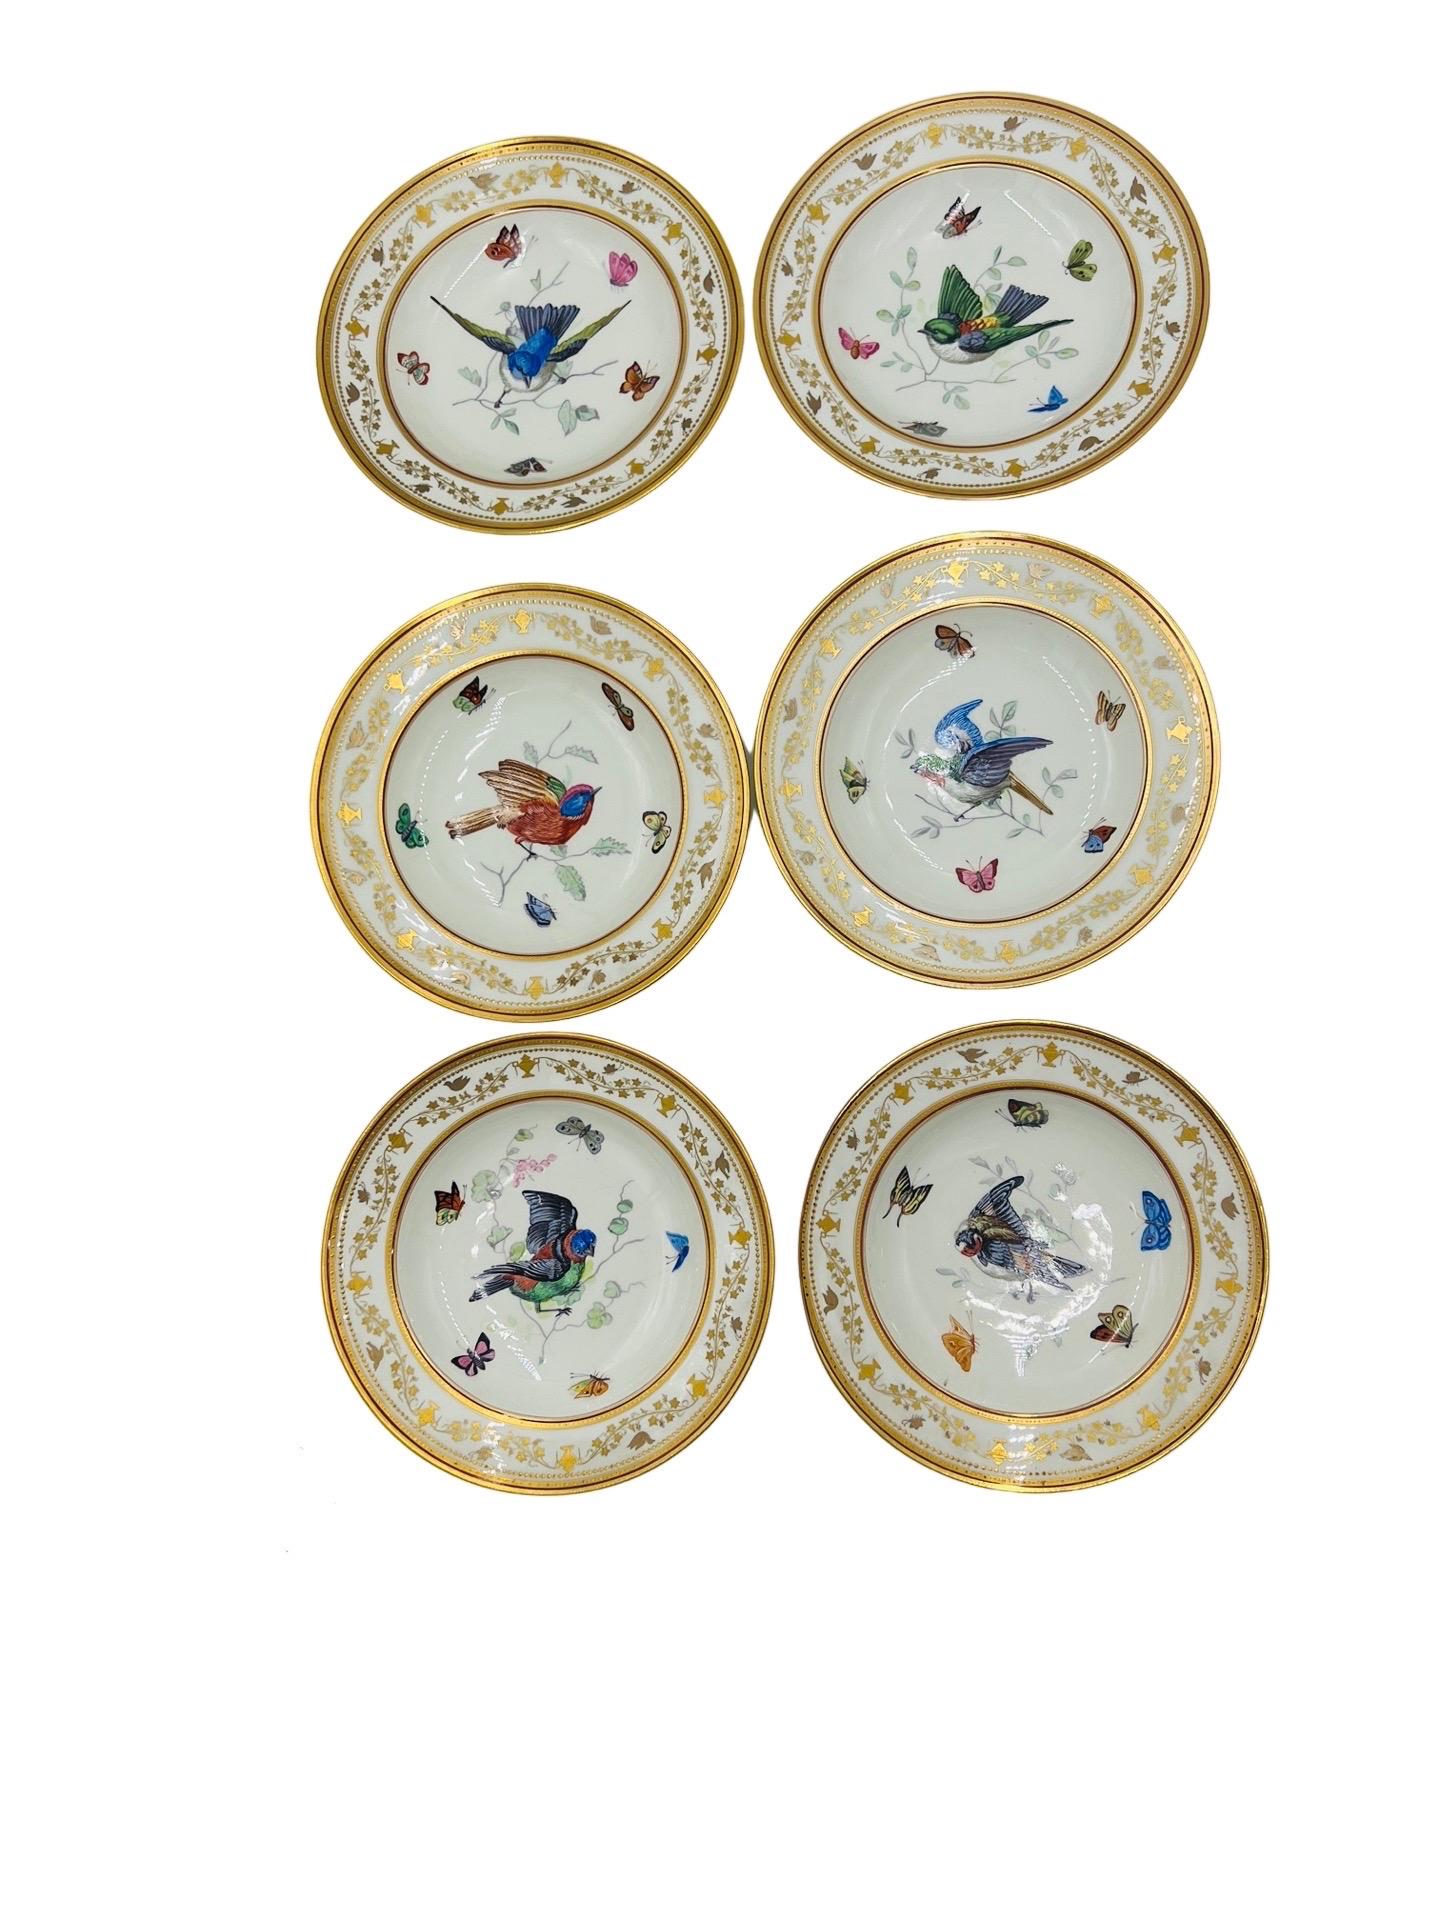 An incredibly rare set of Royal Vienna plates depicting 12 different finely enamel painted bird plates accented by multicolored butterflies to the center bowls and a stunning vine motif to the borders which feature neoclassical urns, birds and more